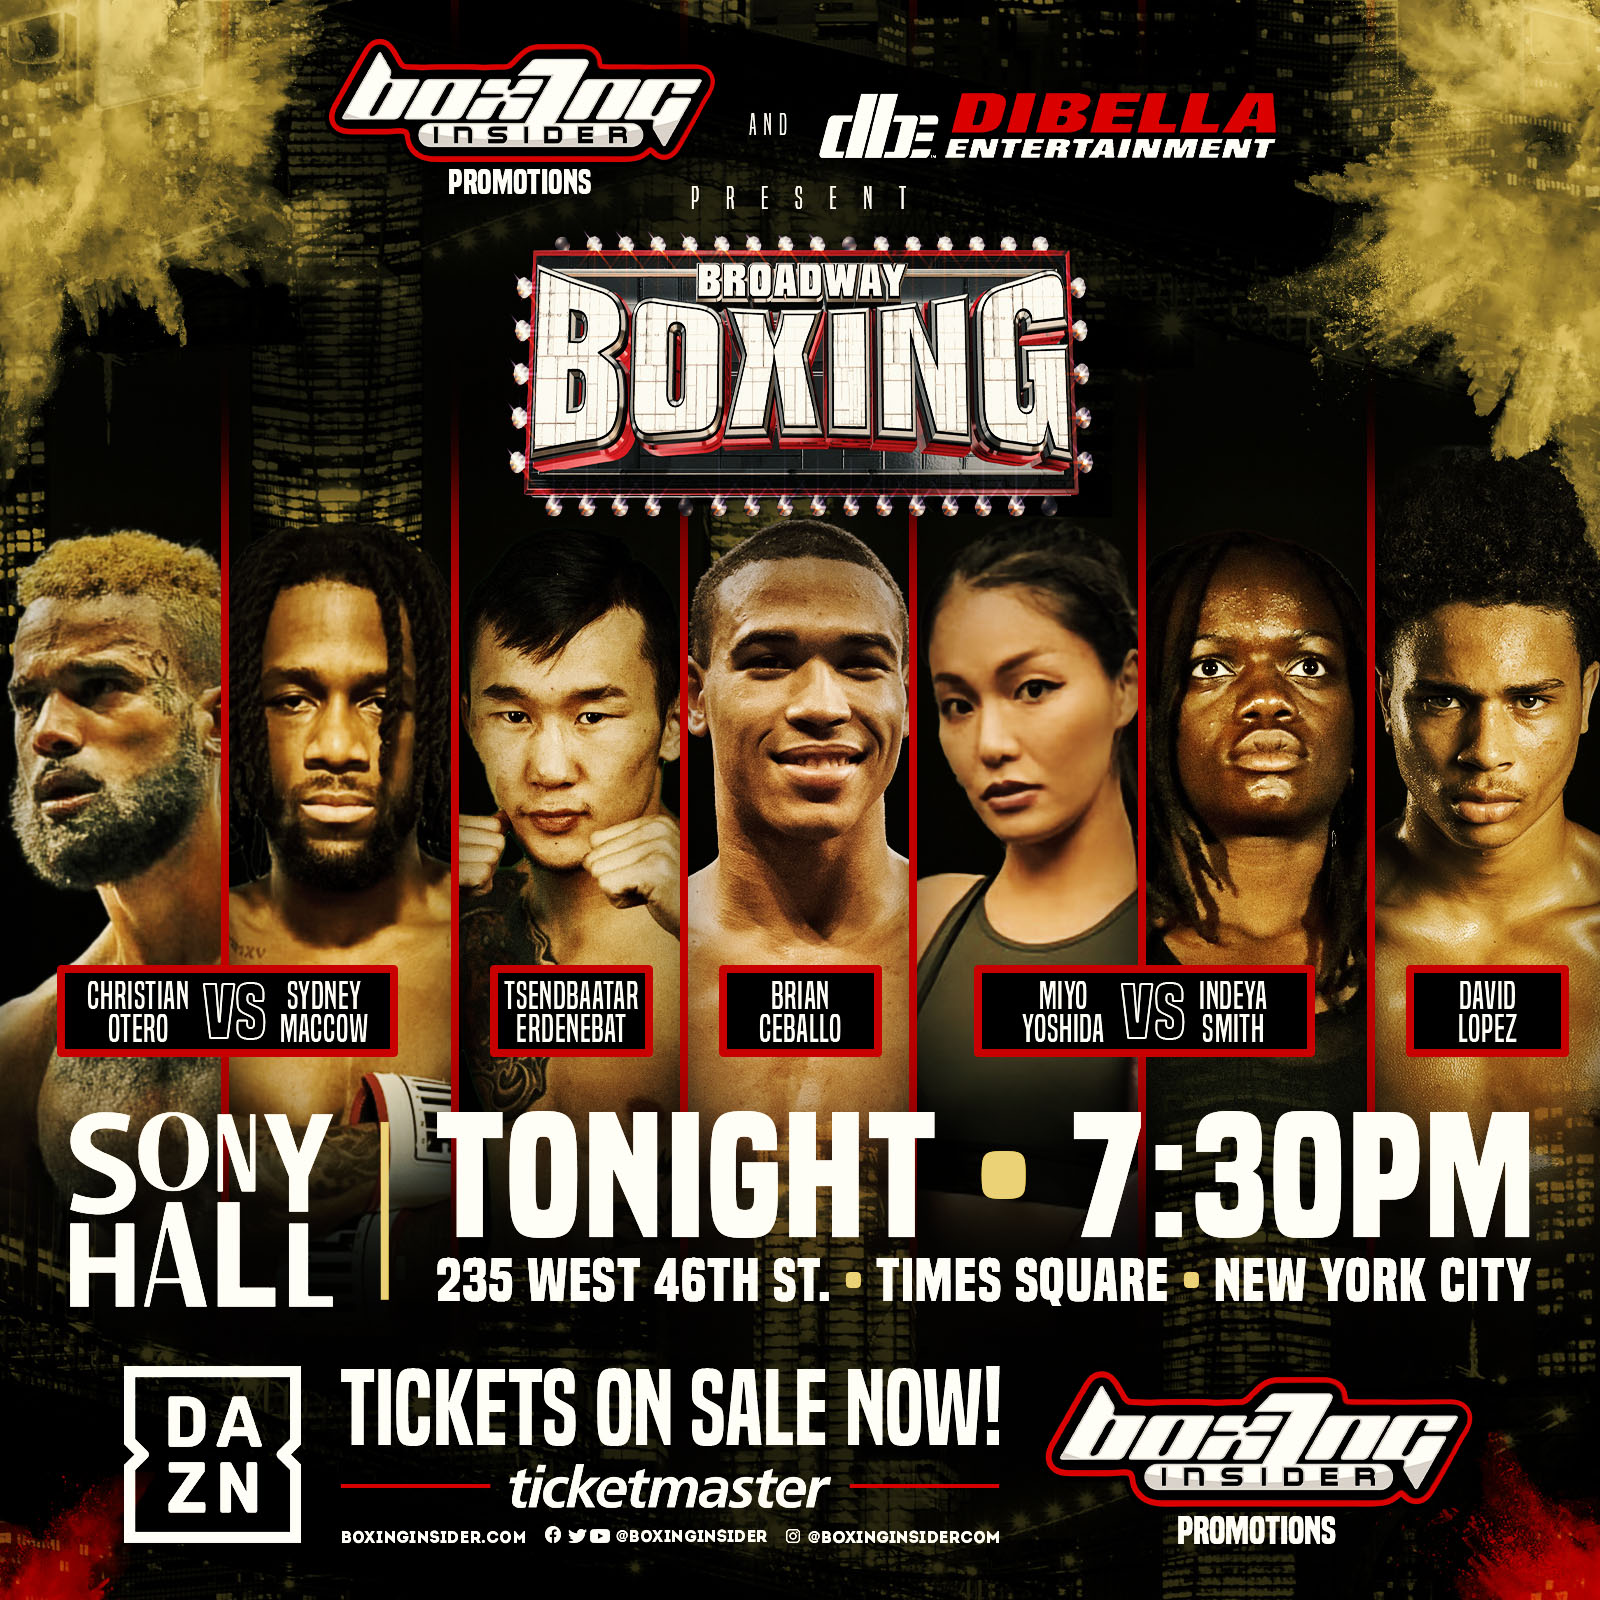 Boxing Insider Presents Broadway Boxing on DAZN Featuring Brian Ceballo